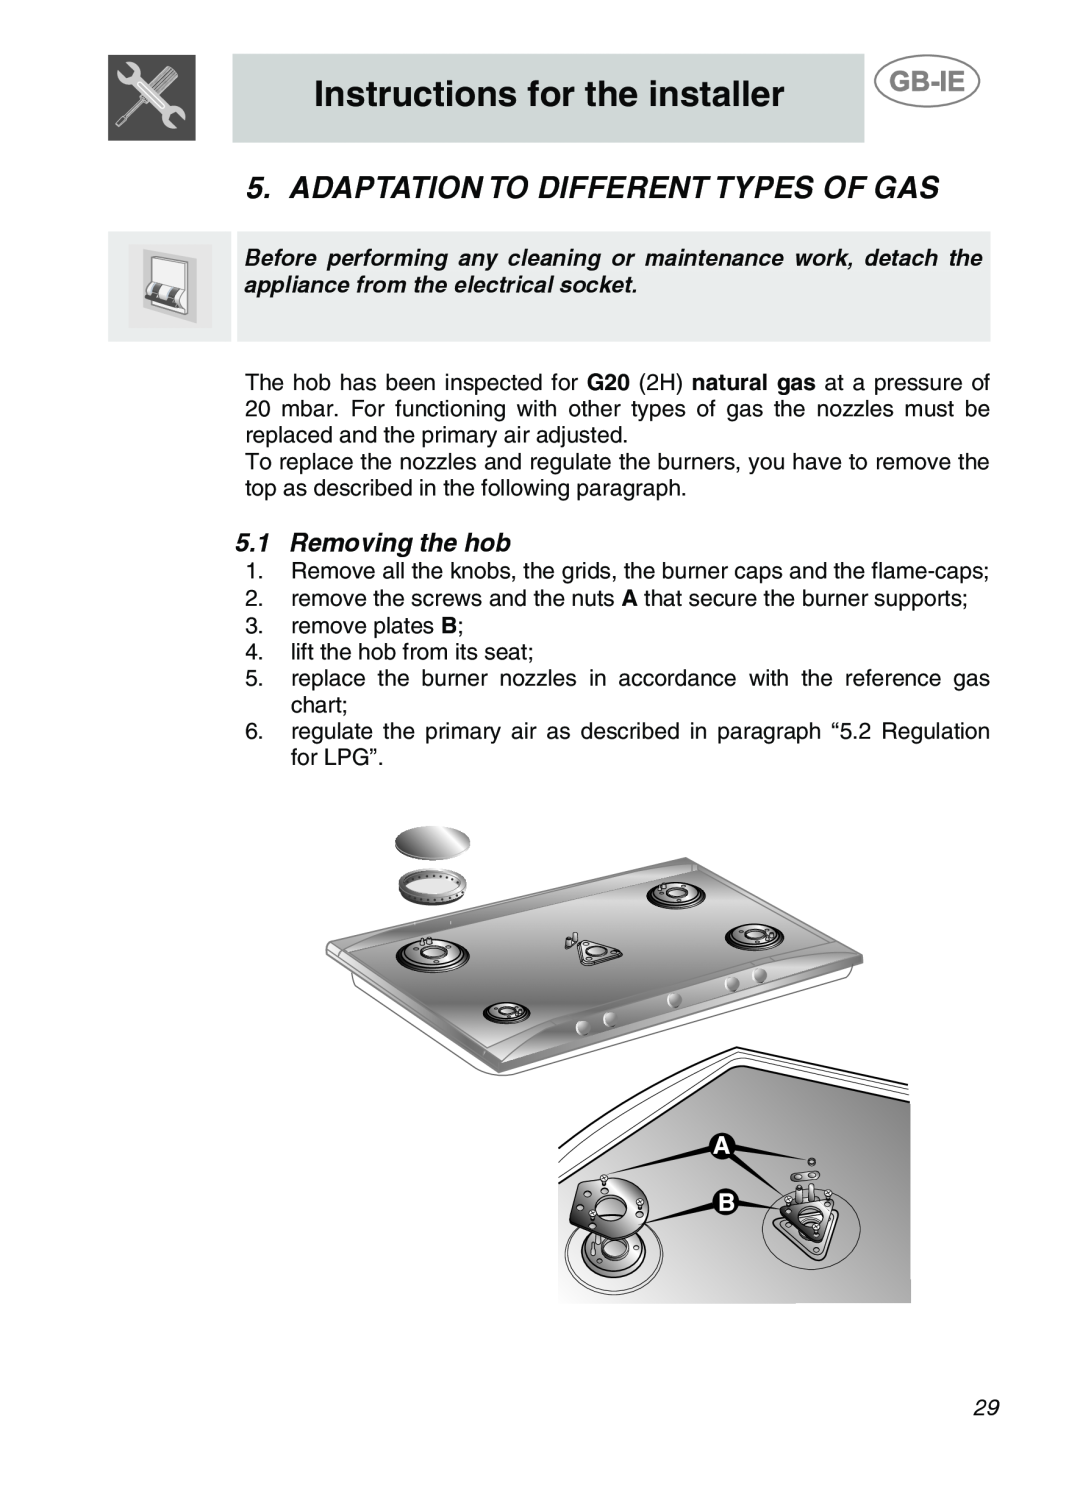 Smeg AP704S3 manual Adaptation To Different Types Of Gas, Removing the hob, Instructions for the installer 